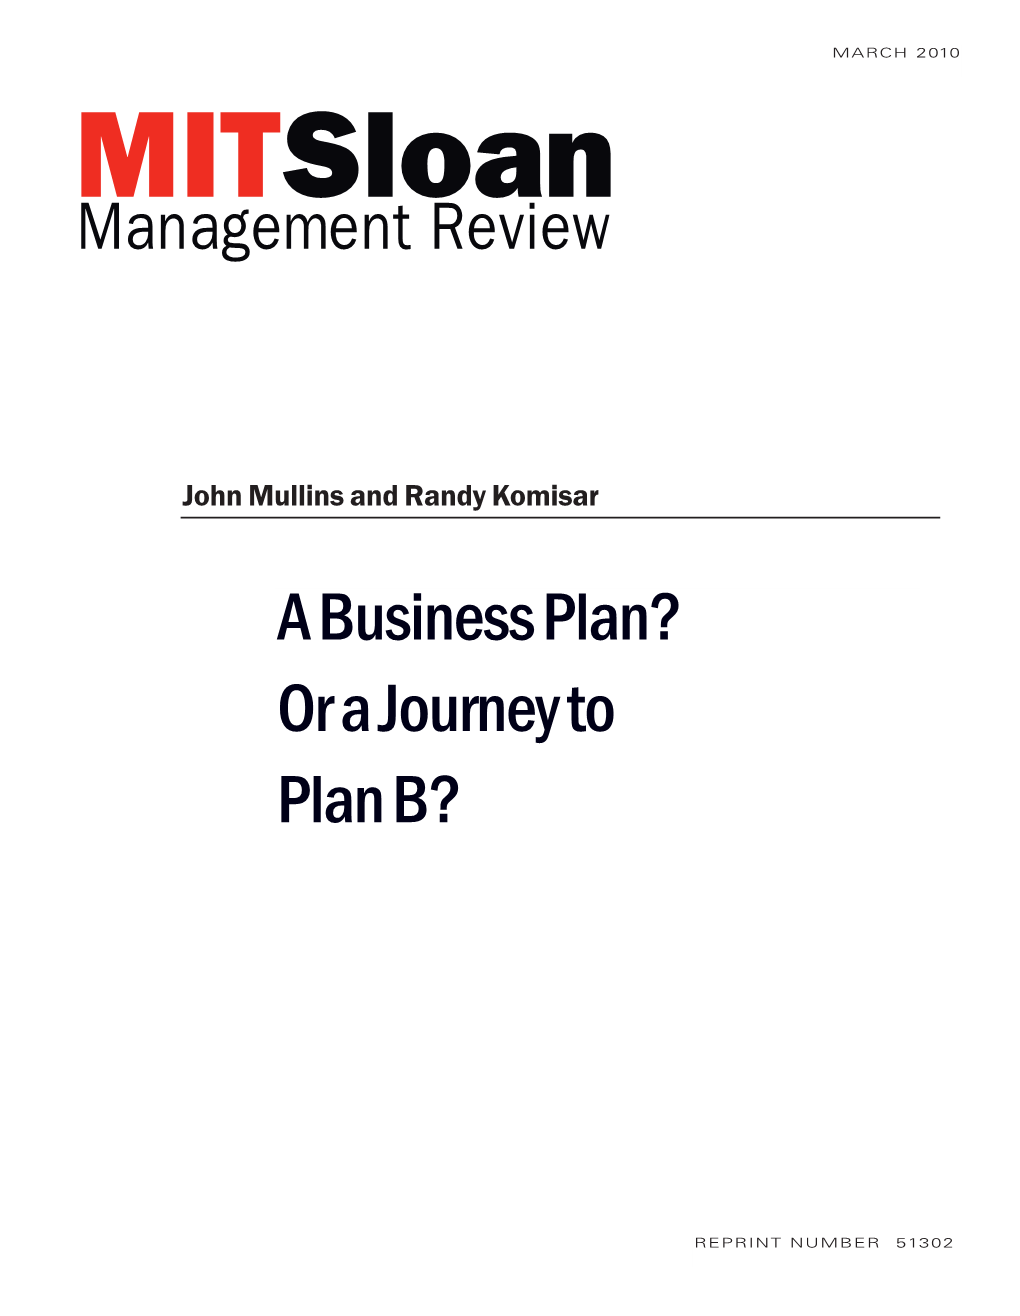 A Business Plan? Or a Journey to Plan B?